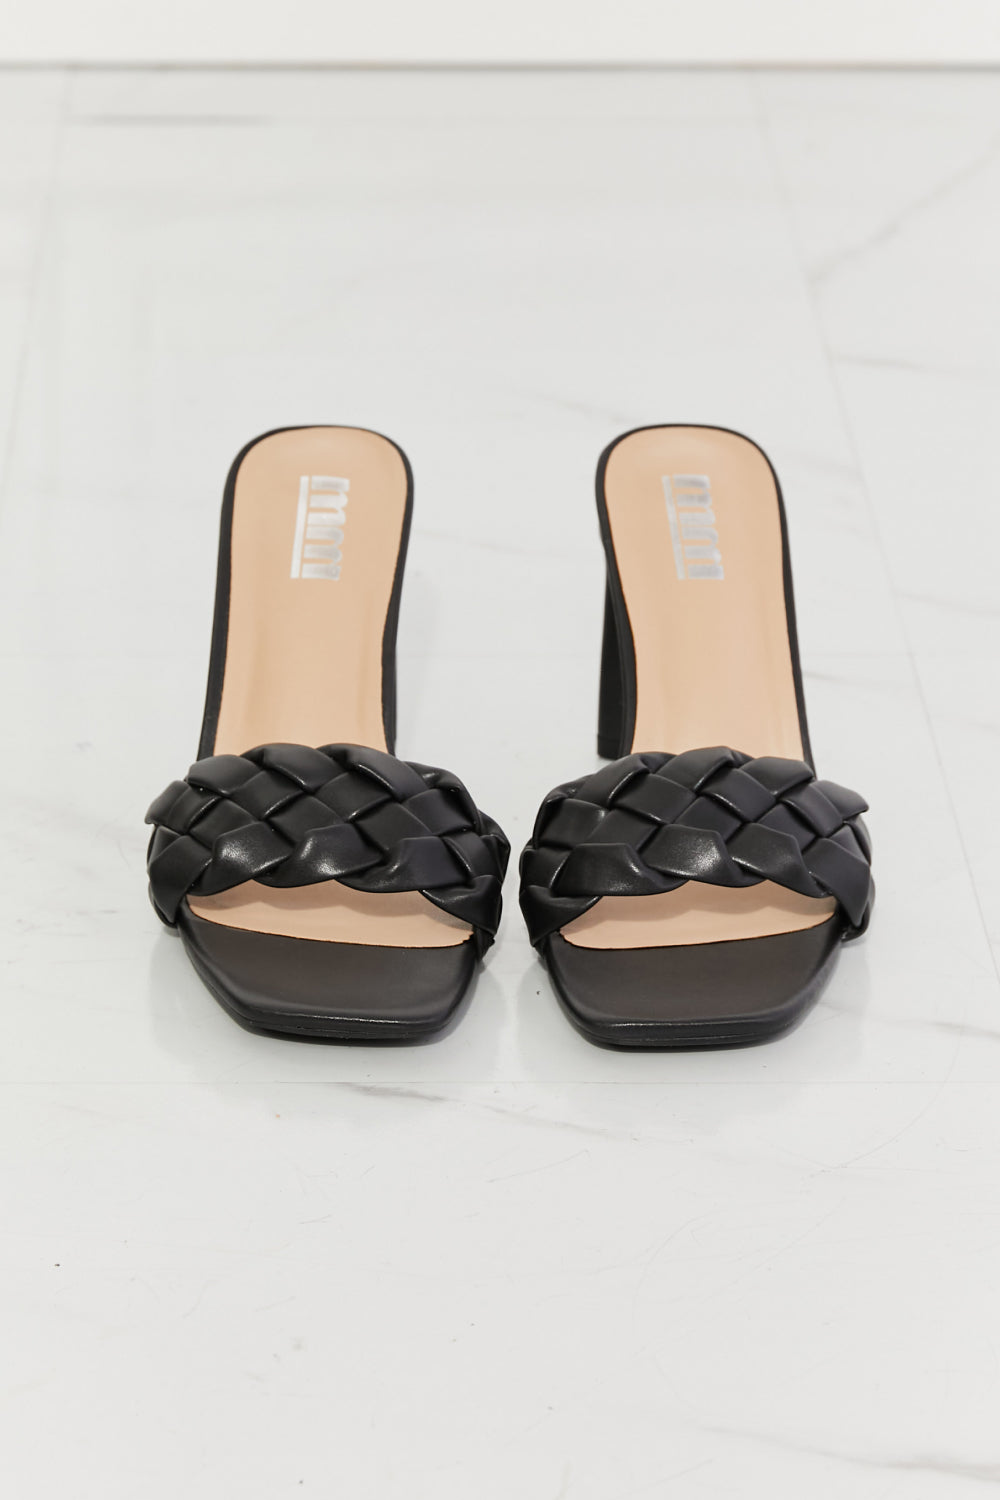 Top of the World Braided Block Heel Sandals in Black - Copper + Rose